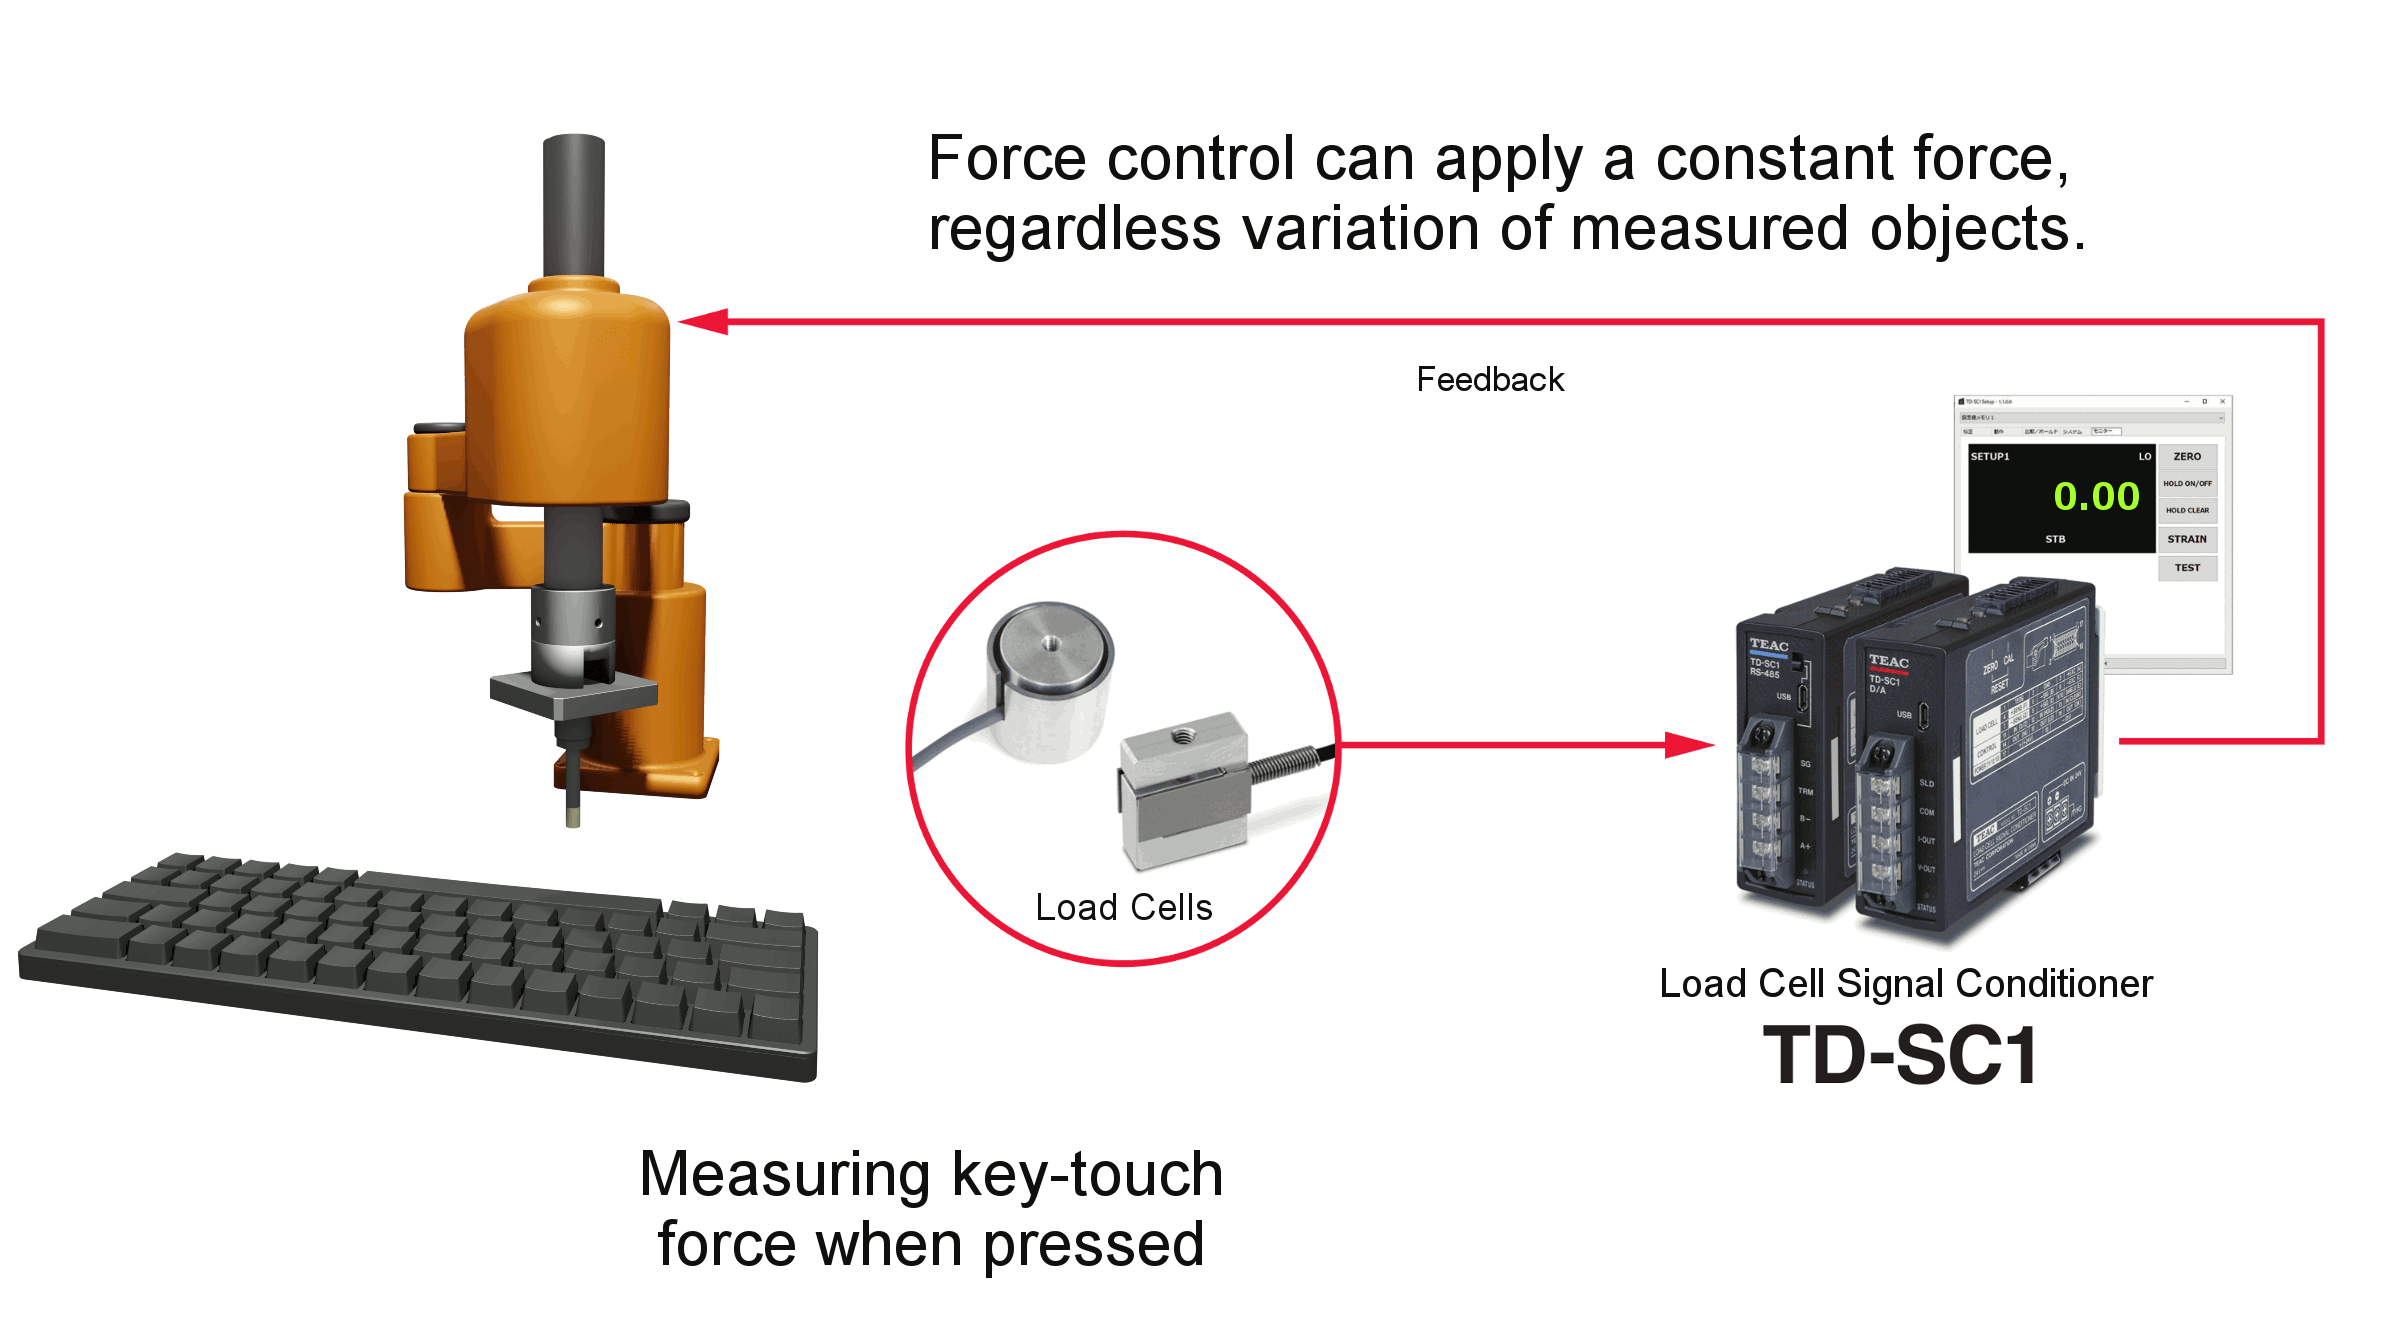 TD-SC1 Measuring key-touch force when pressed